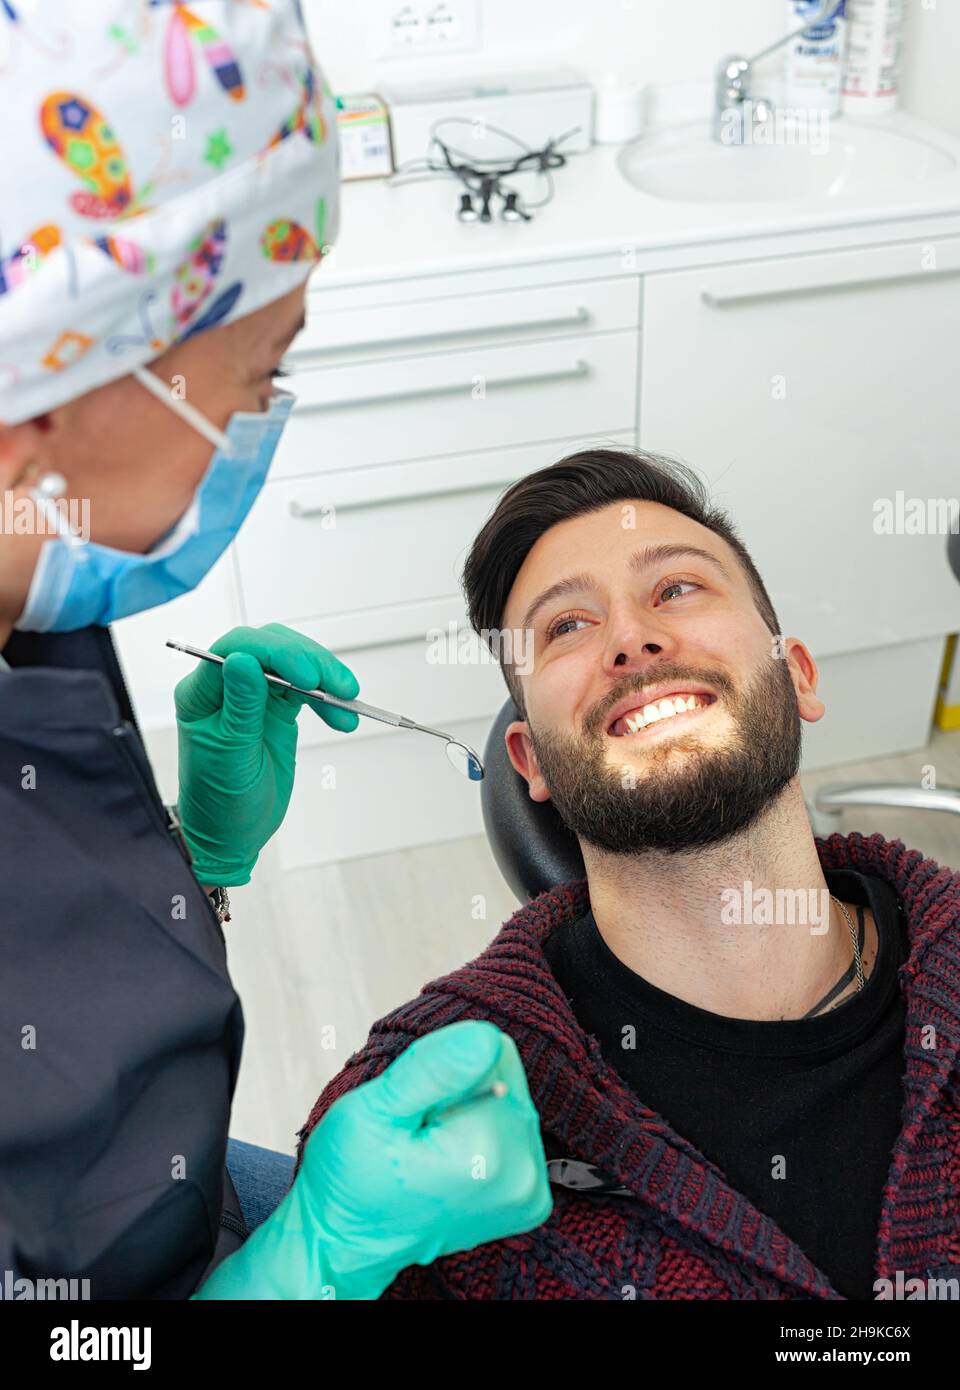 Female dentist examines a man patient in a dental office using professional tools and personal protective equipment. Stock Photo